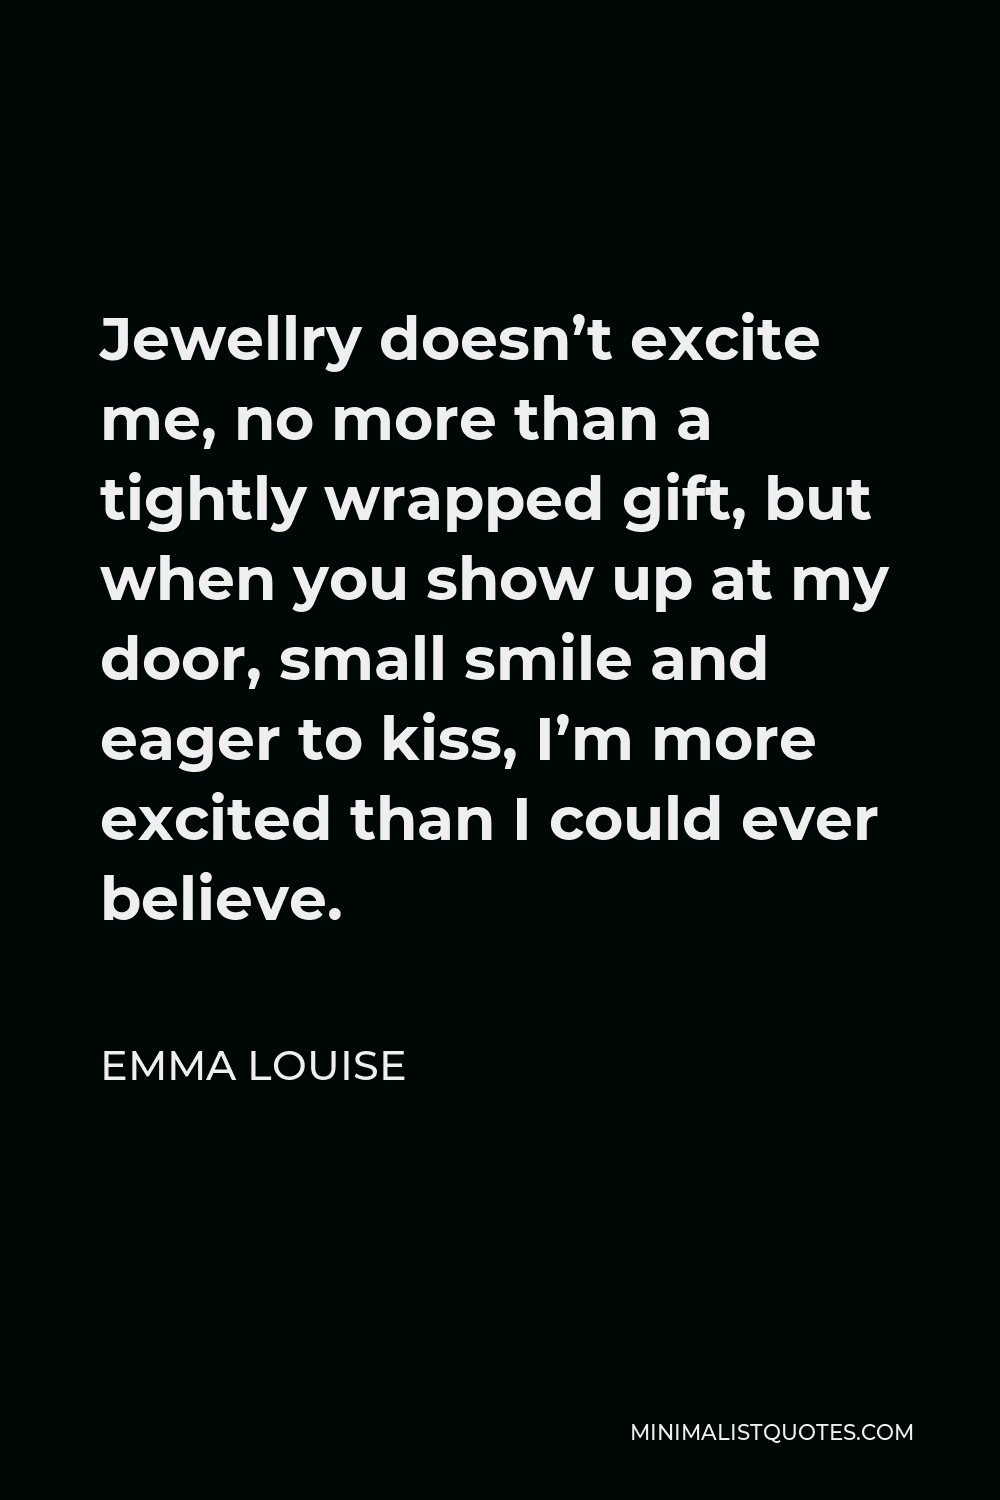 Emma Louise Quote - Jewellry doesn’t excite me, no more than a tightly wrapped gift, but when you show up at my door, small smile and eager to kiss, I’m more excited than I could ever believe.